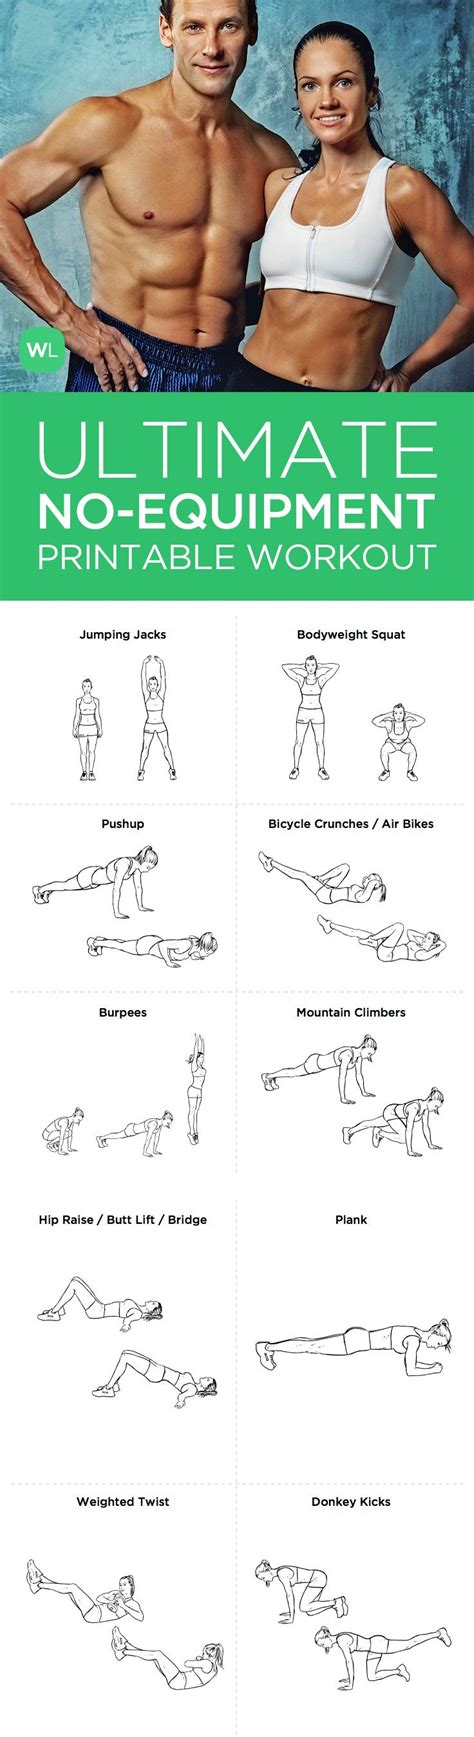 Home workouts with some equipment. Visit http://workoutlabs.com/workout-plans/ultimate-at ...